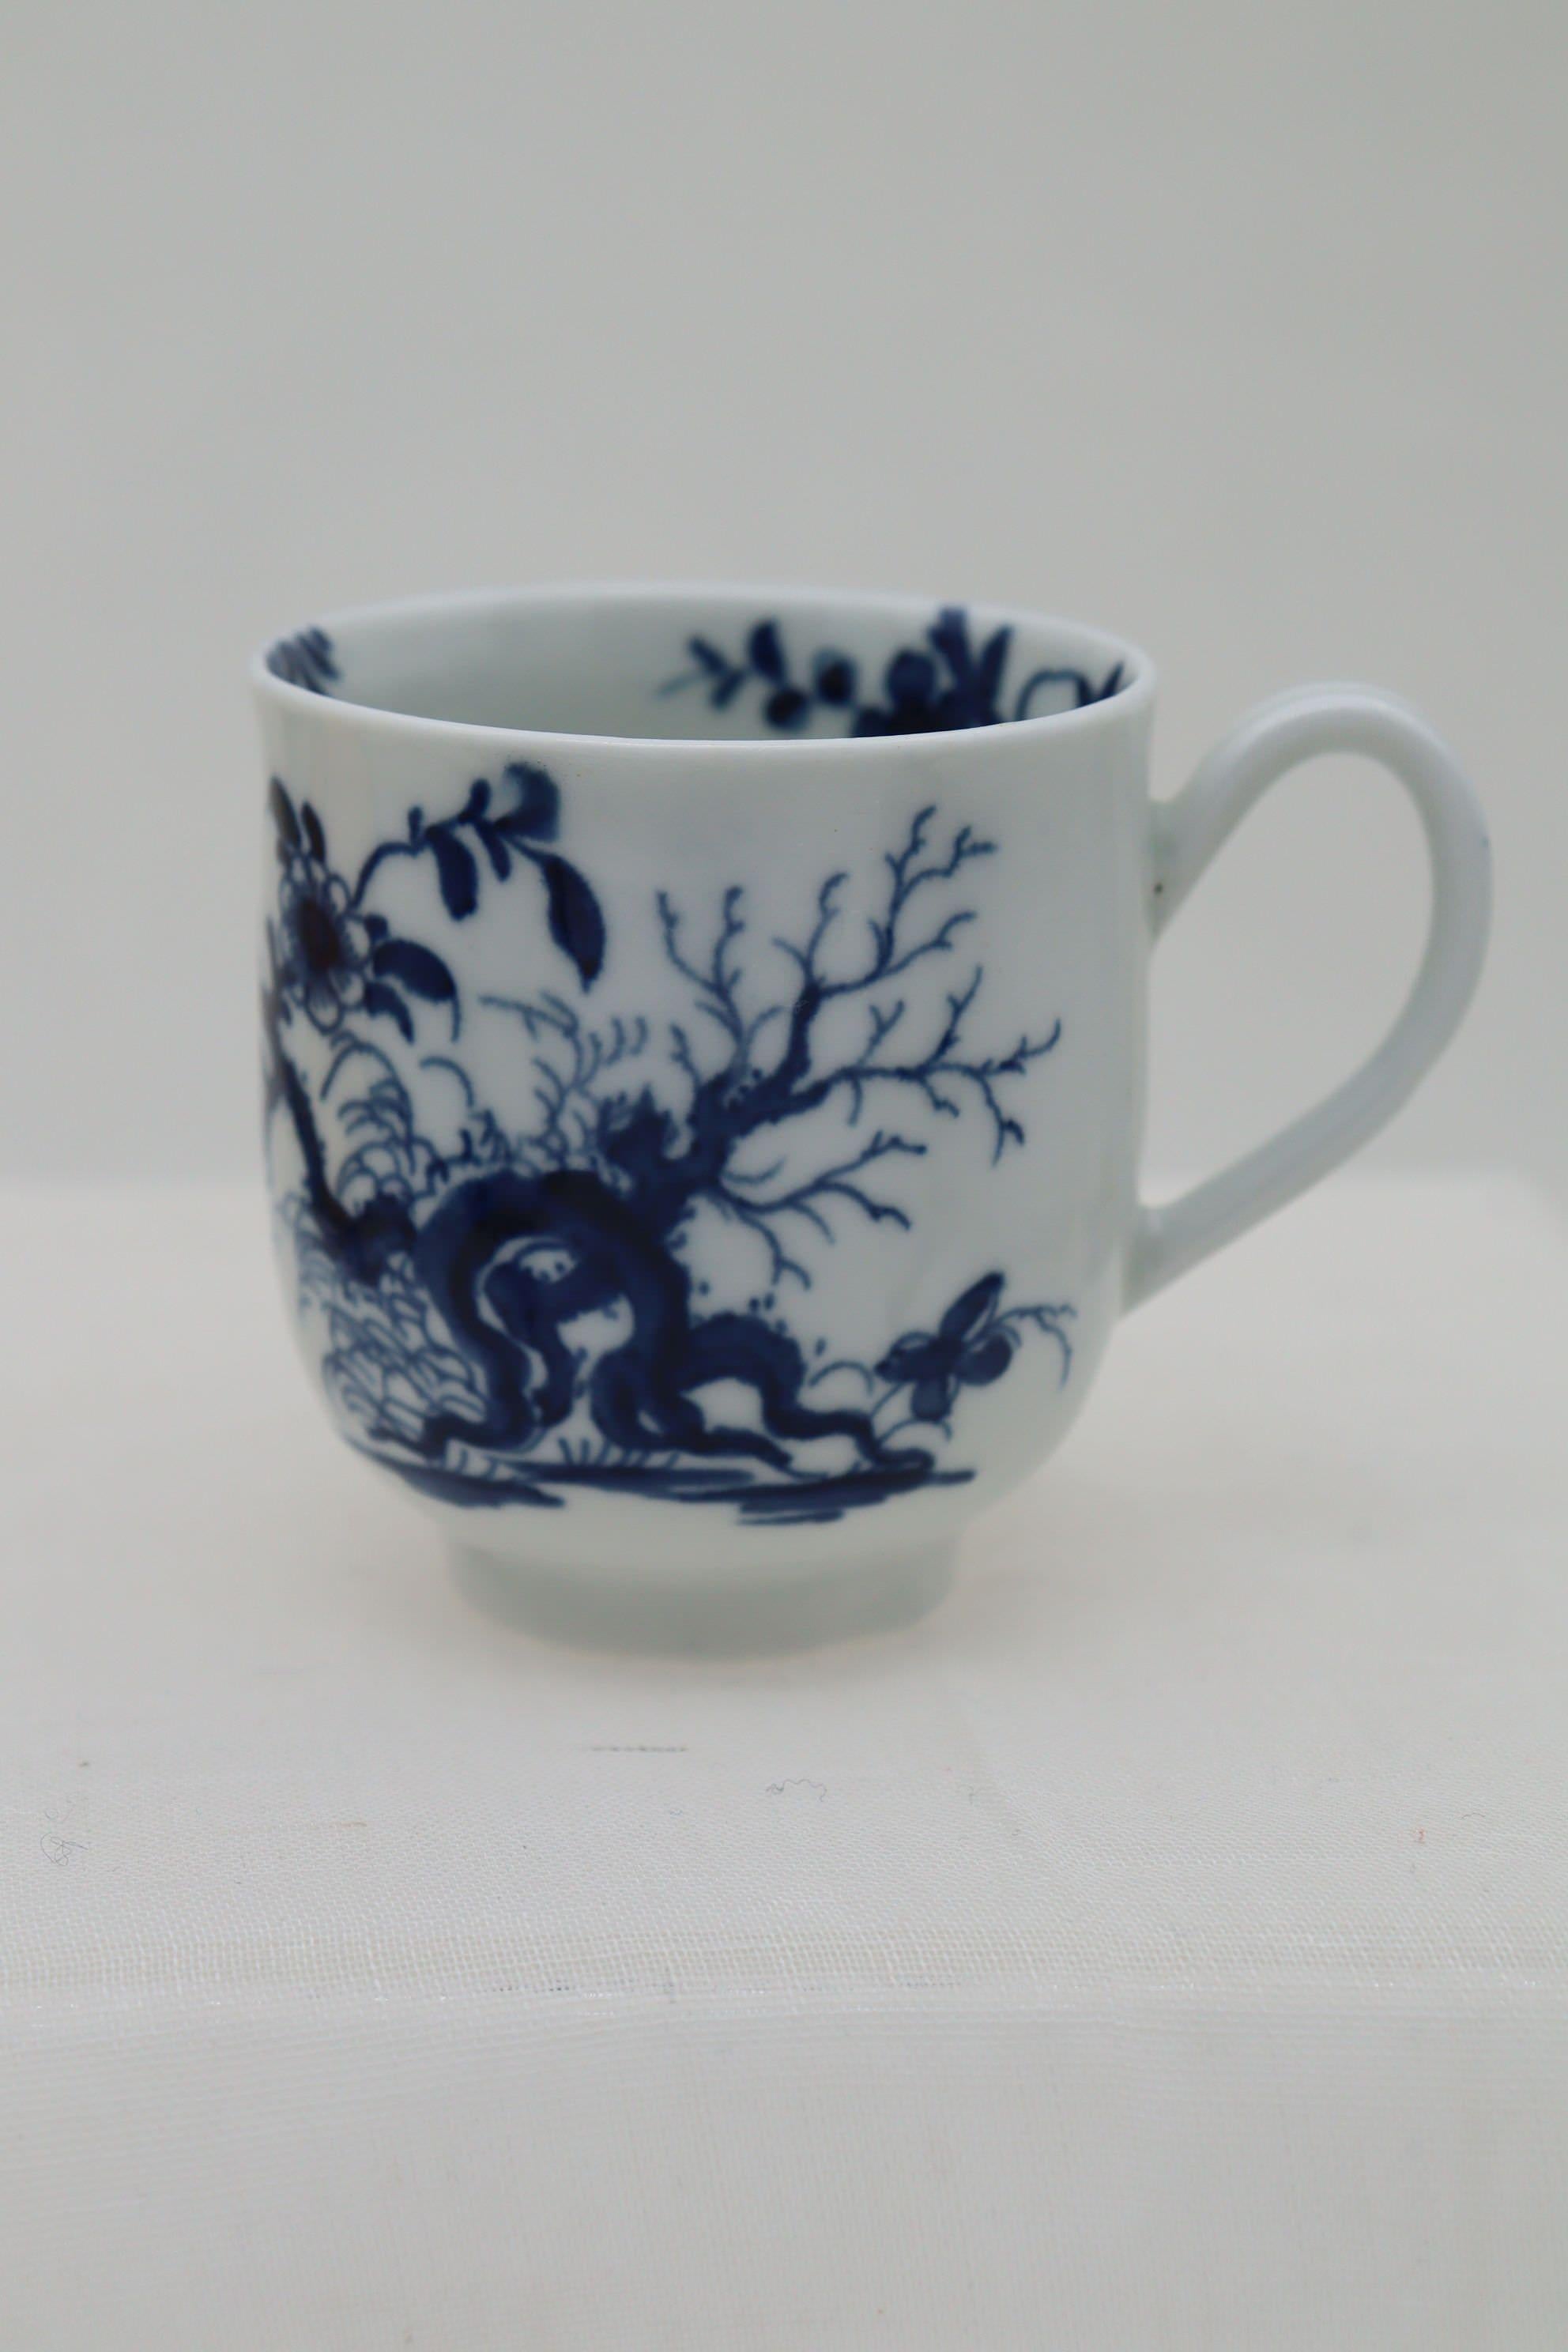 This First period Worcester porcelain coffee cup is decorated with the hand painted blue and white 